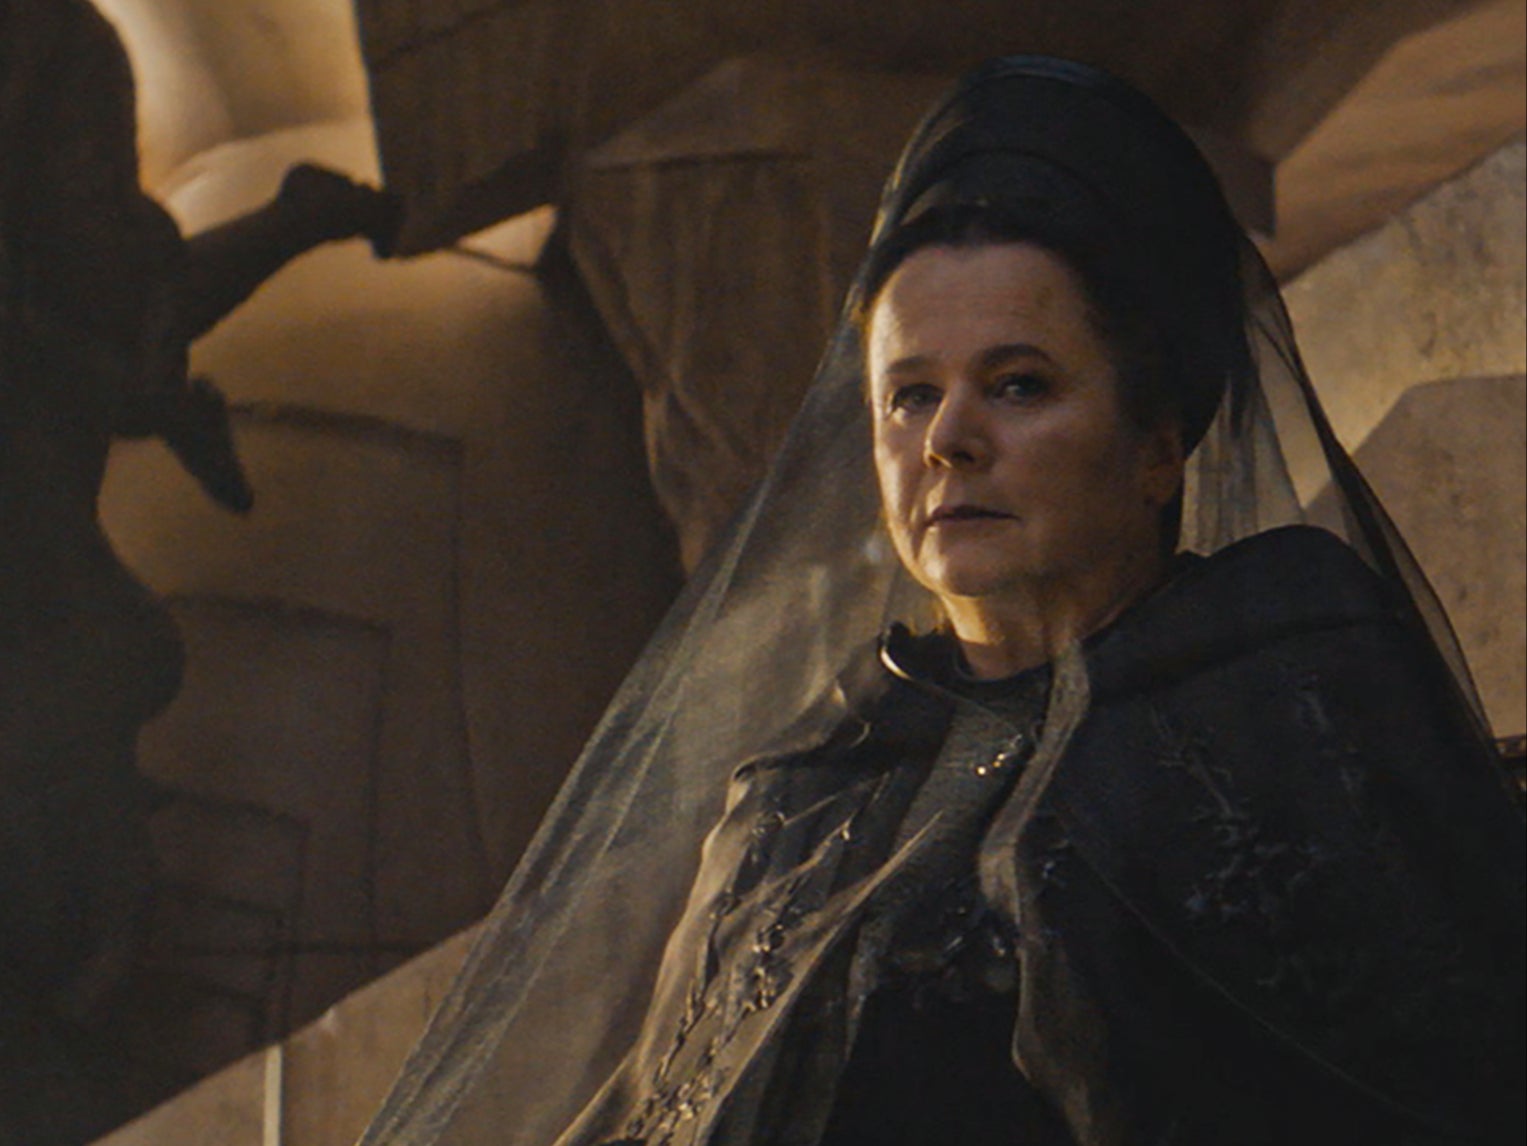 Emily Watson plays Valya Harkonnen in the Dune prequel series, ‘Dune: Prophecy’ debuting this fall